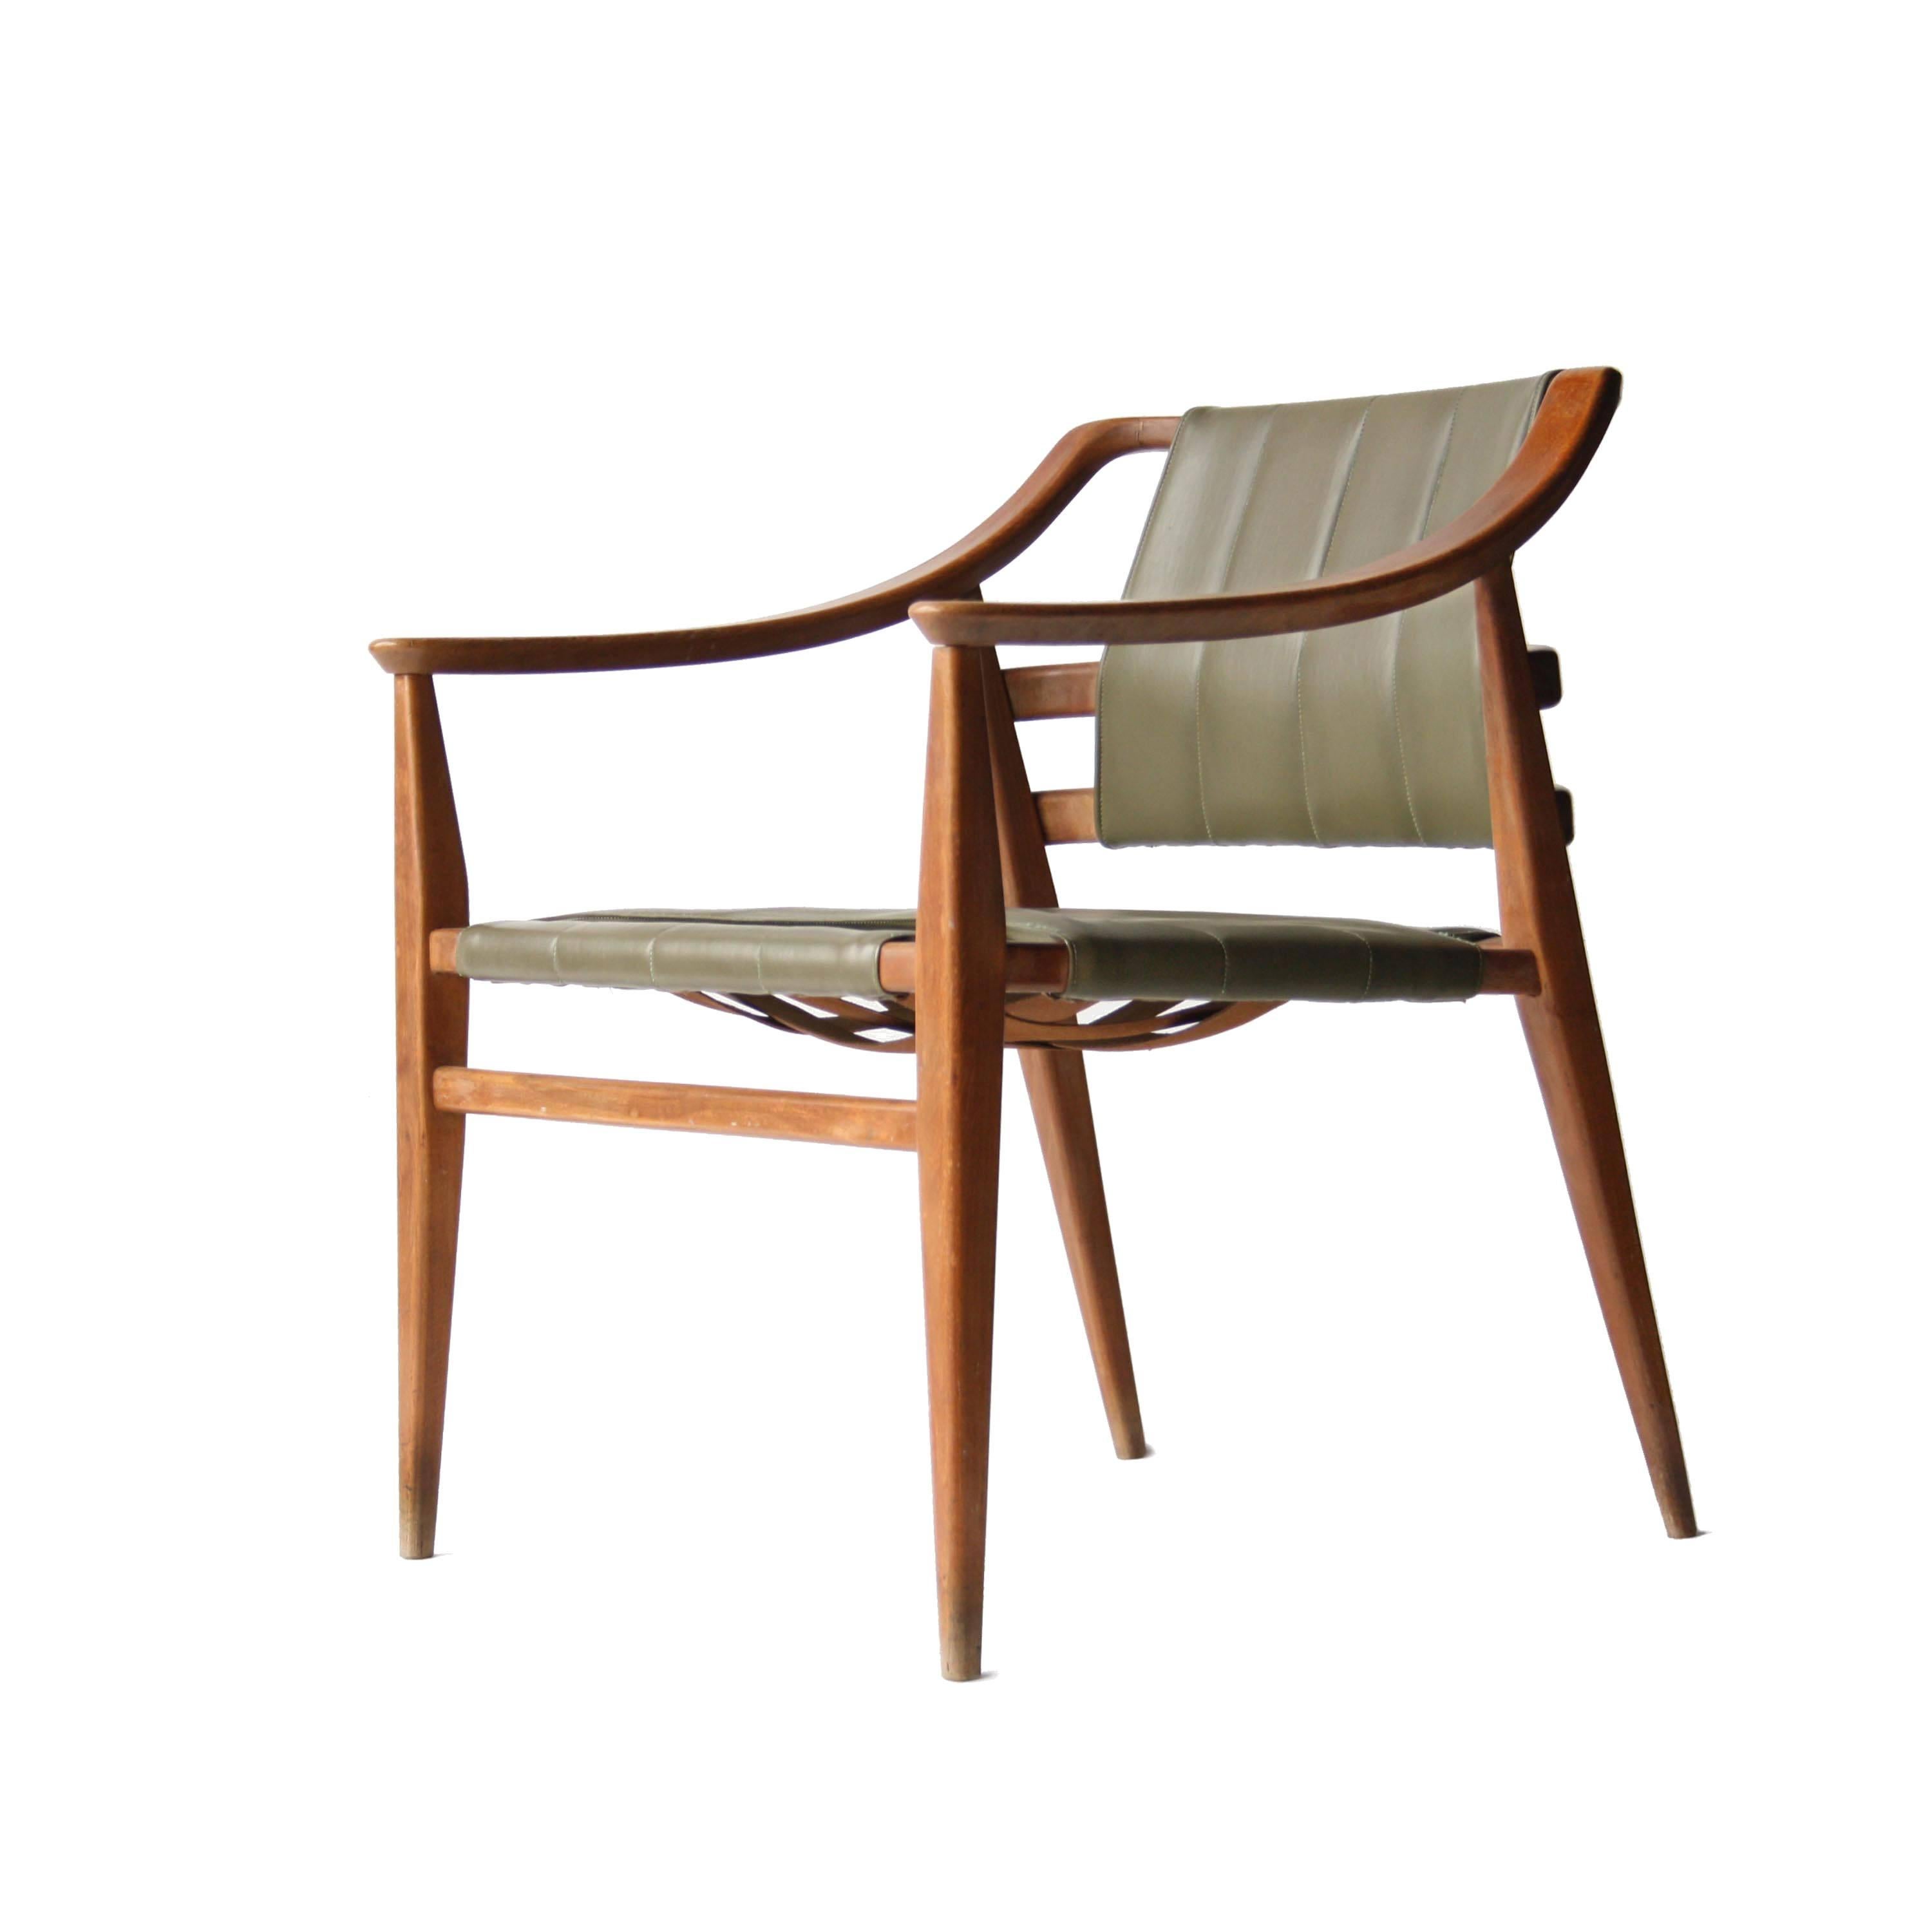 Armchair and footstool made of solid teak with upholstered in polyskin green.